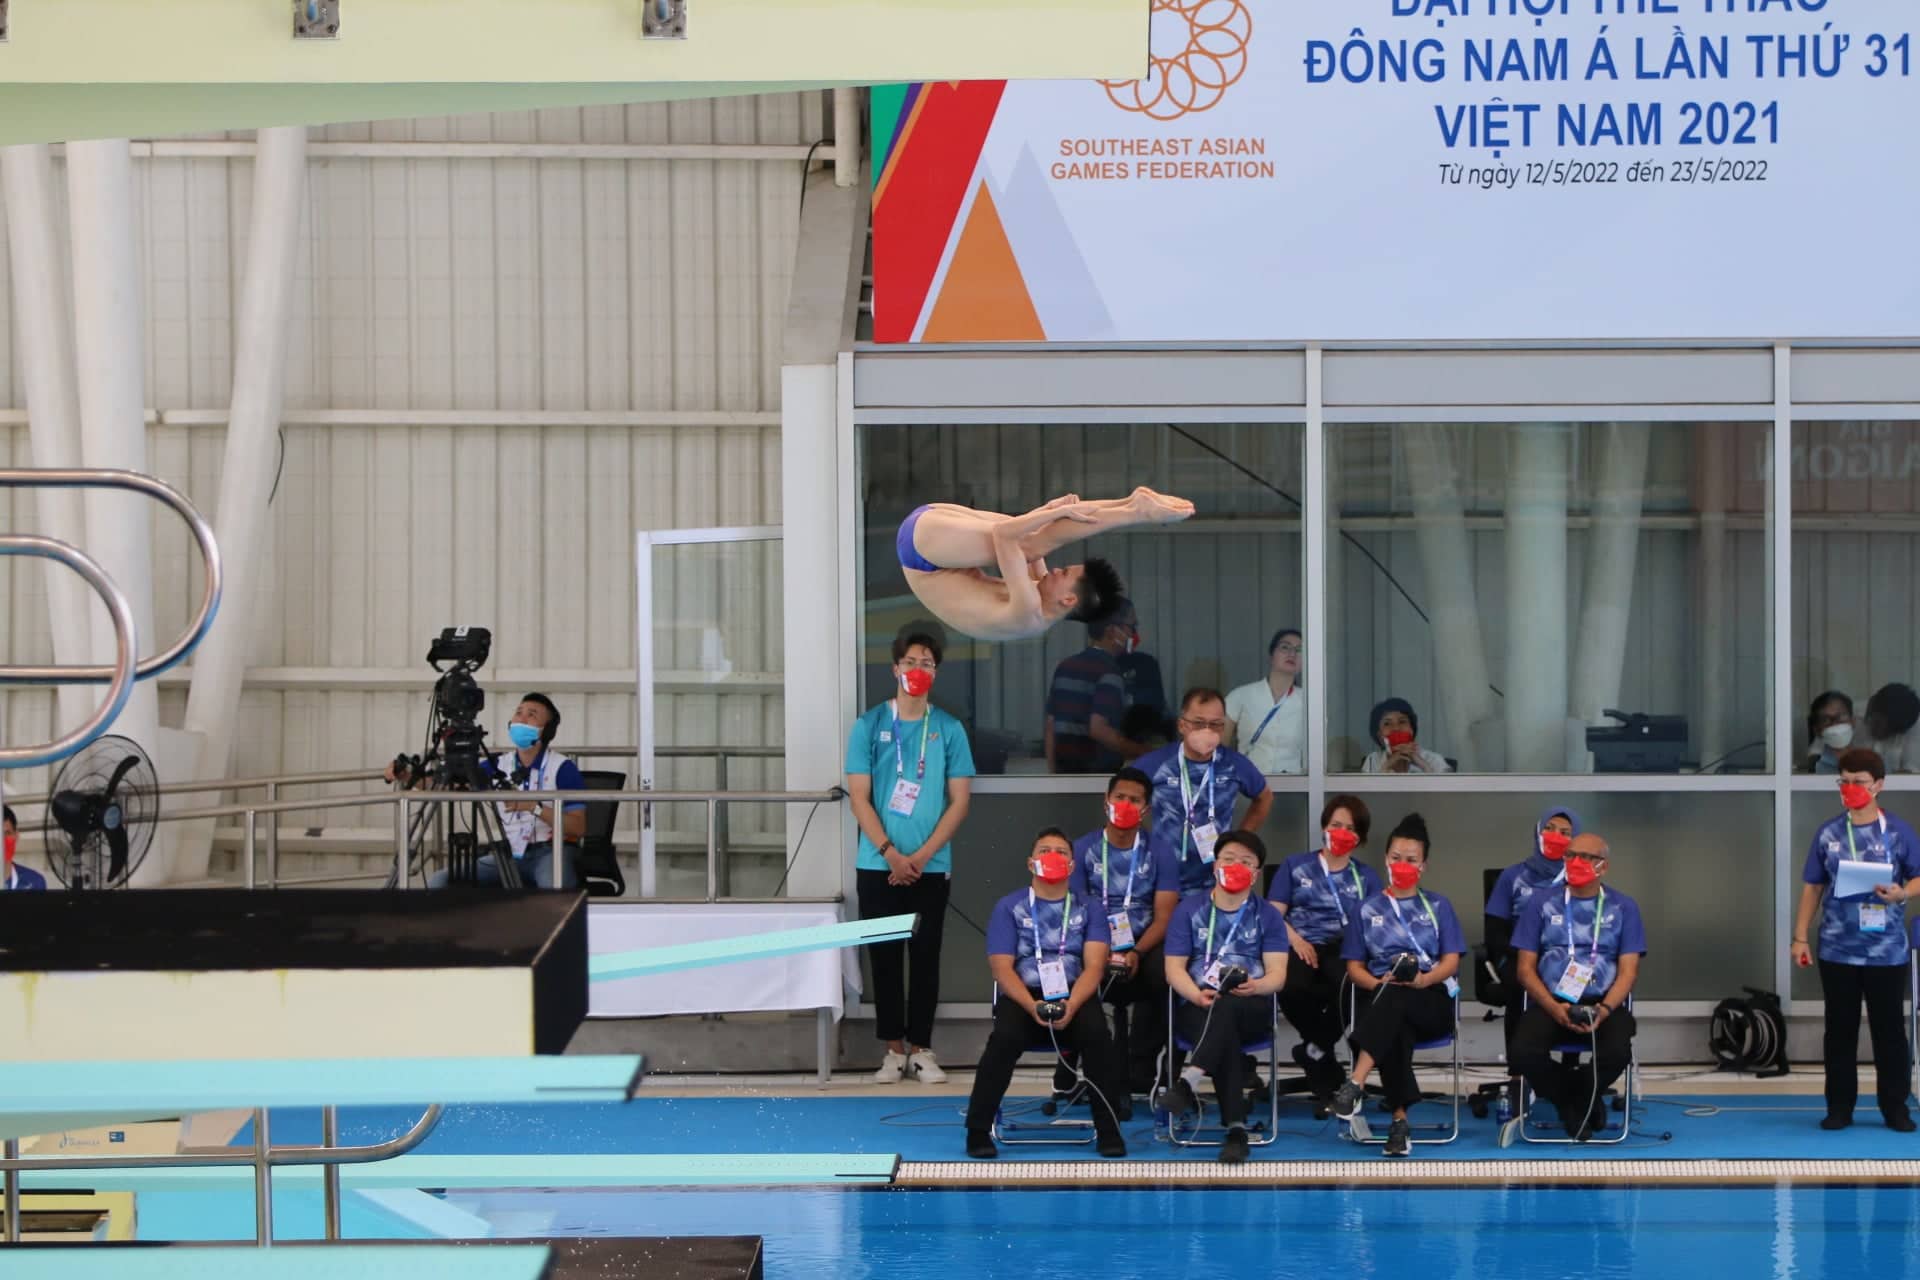 Phuong The Anh competes in the men’s singles one-meter springboard final at the 31st Southeast Asian (SEA) Games at My Dinh Water Sports Center in Hanoi, Vietnam, May 9, 2022. Photo: Tan Phuc / Tuoi Tre